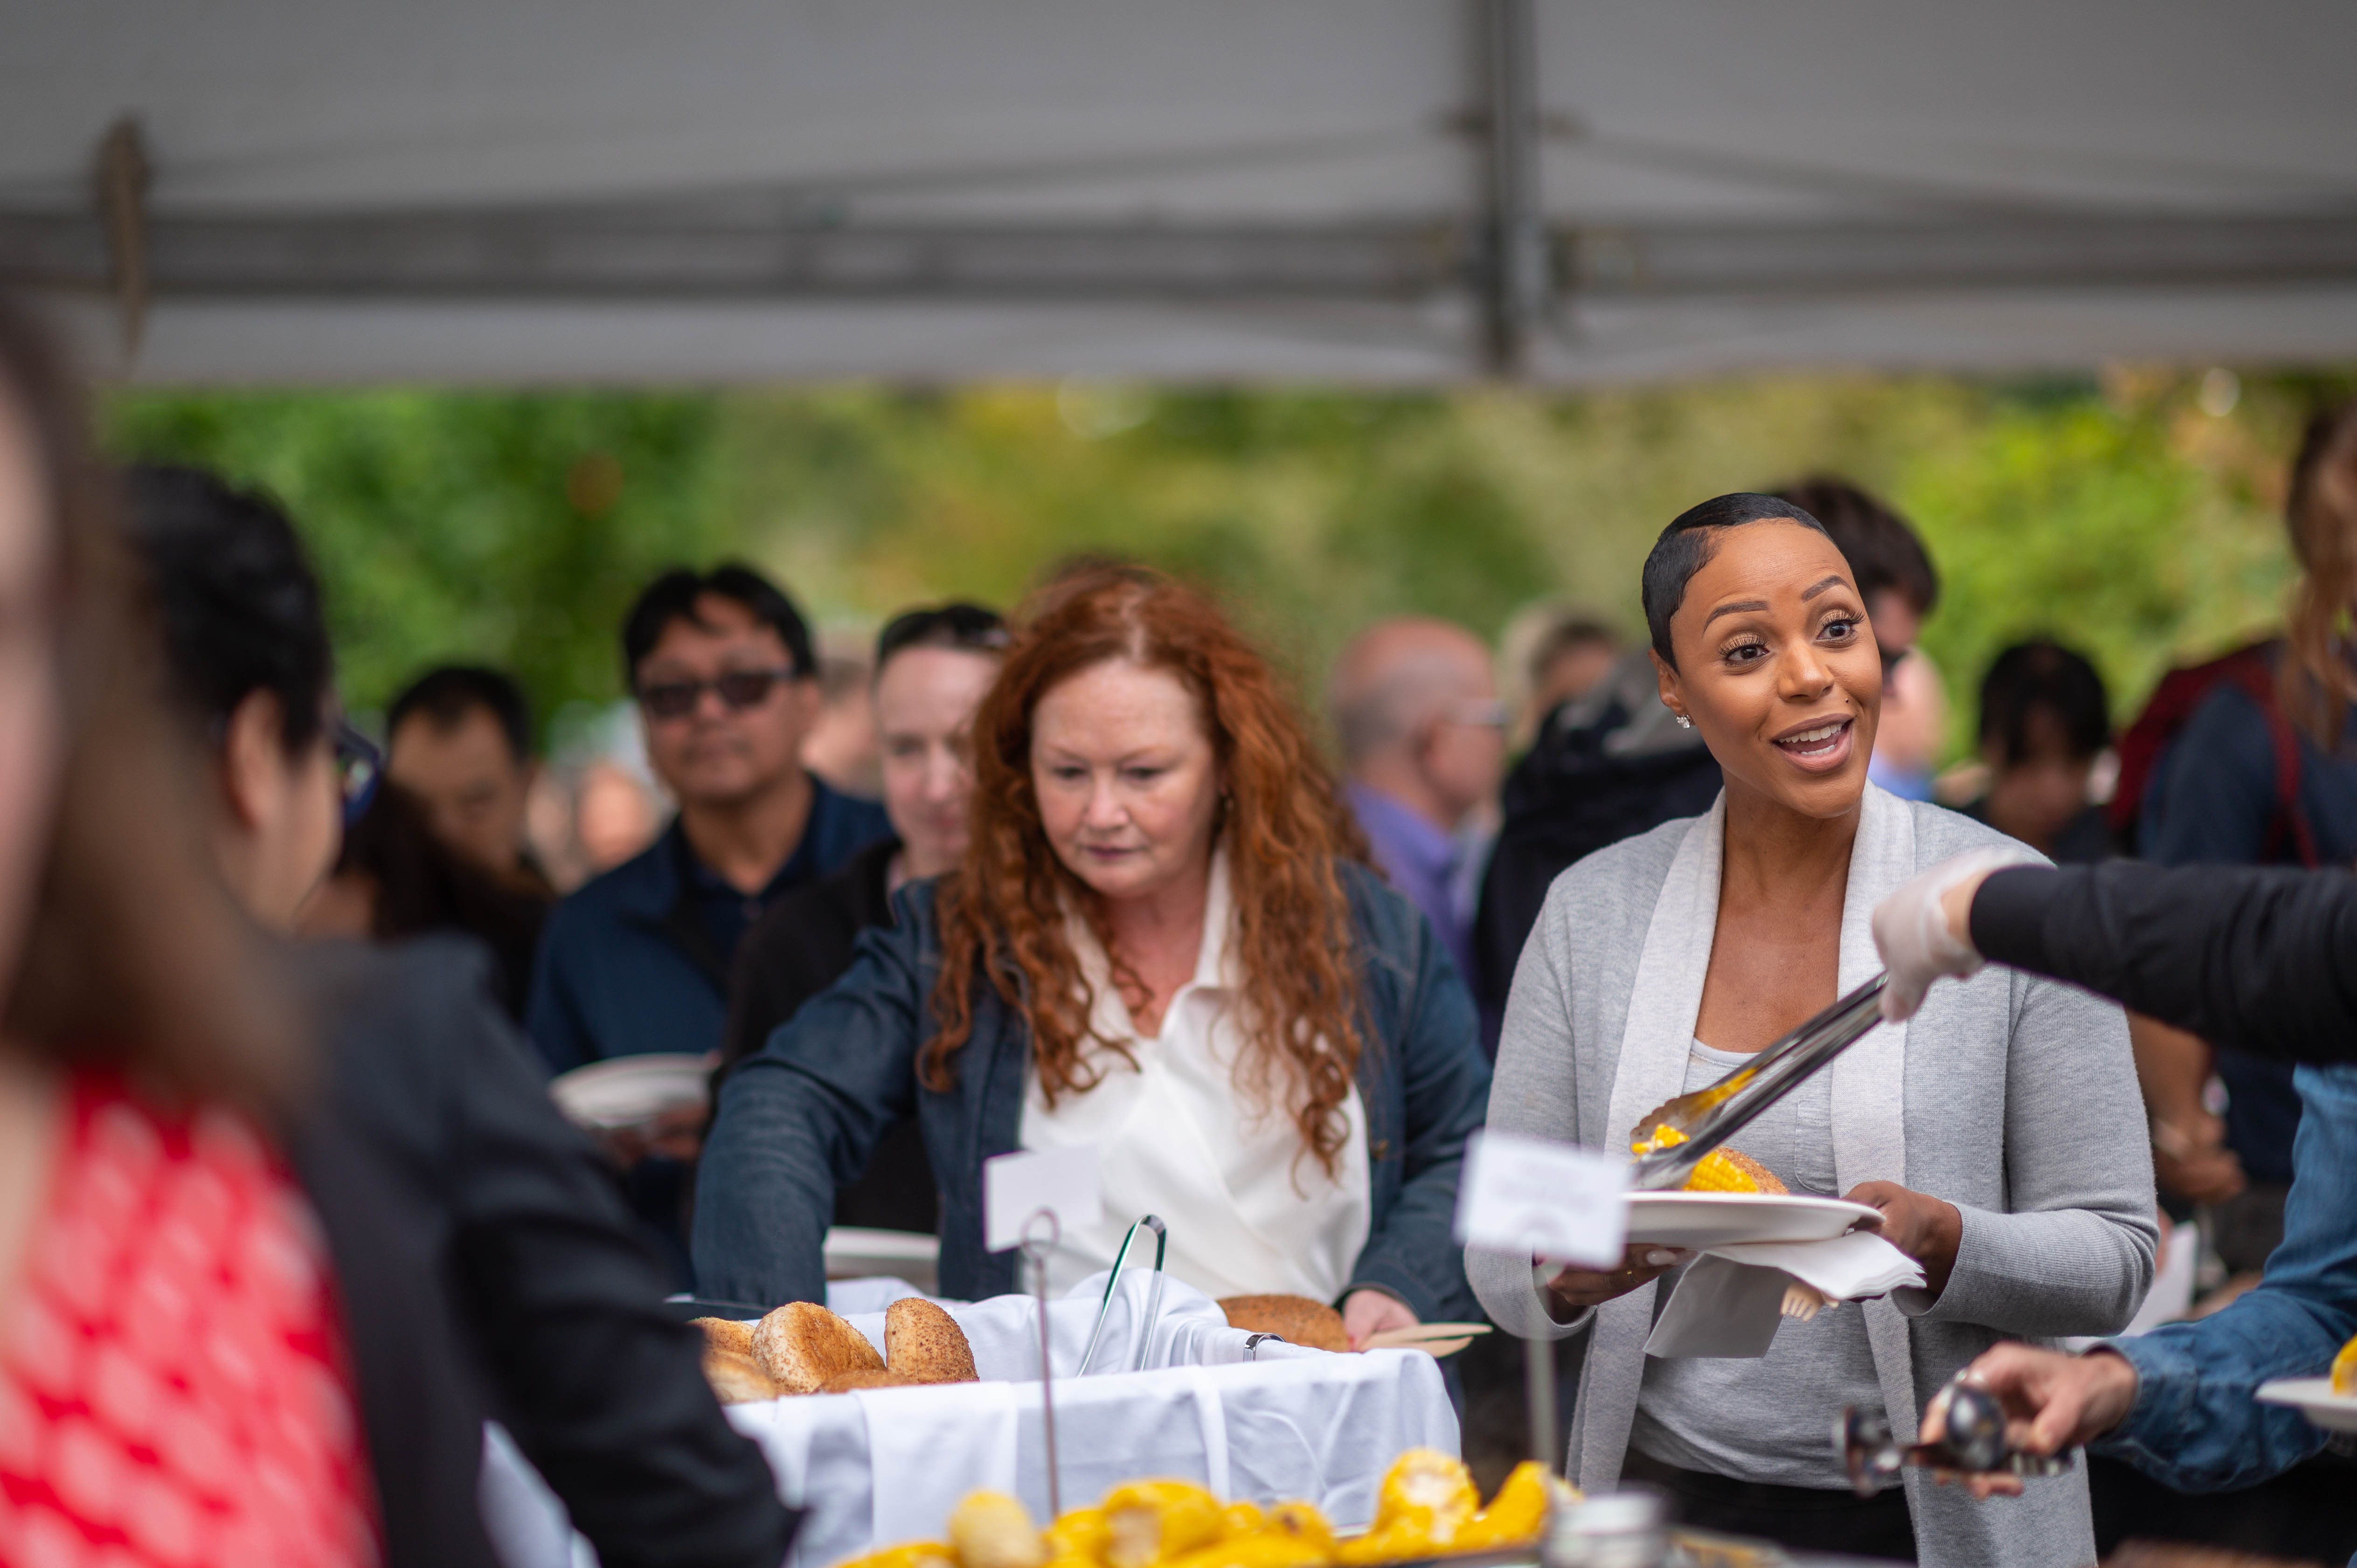 Gallery of pictures from UBC Staff during the 2019 Welcome Back Staff BBQ